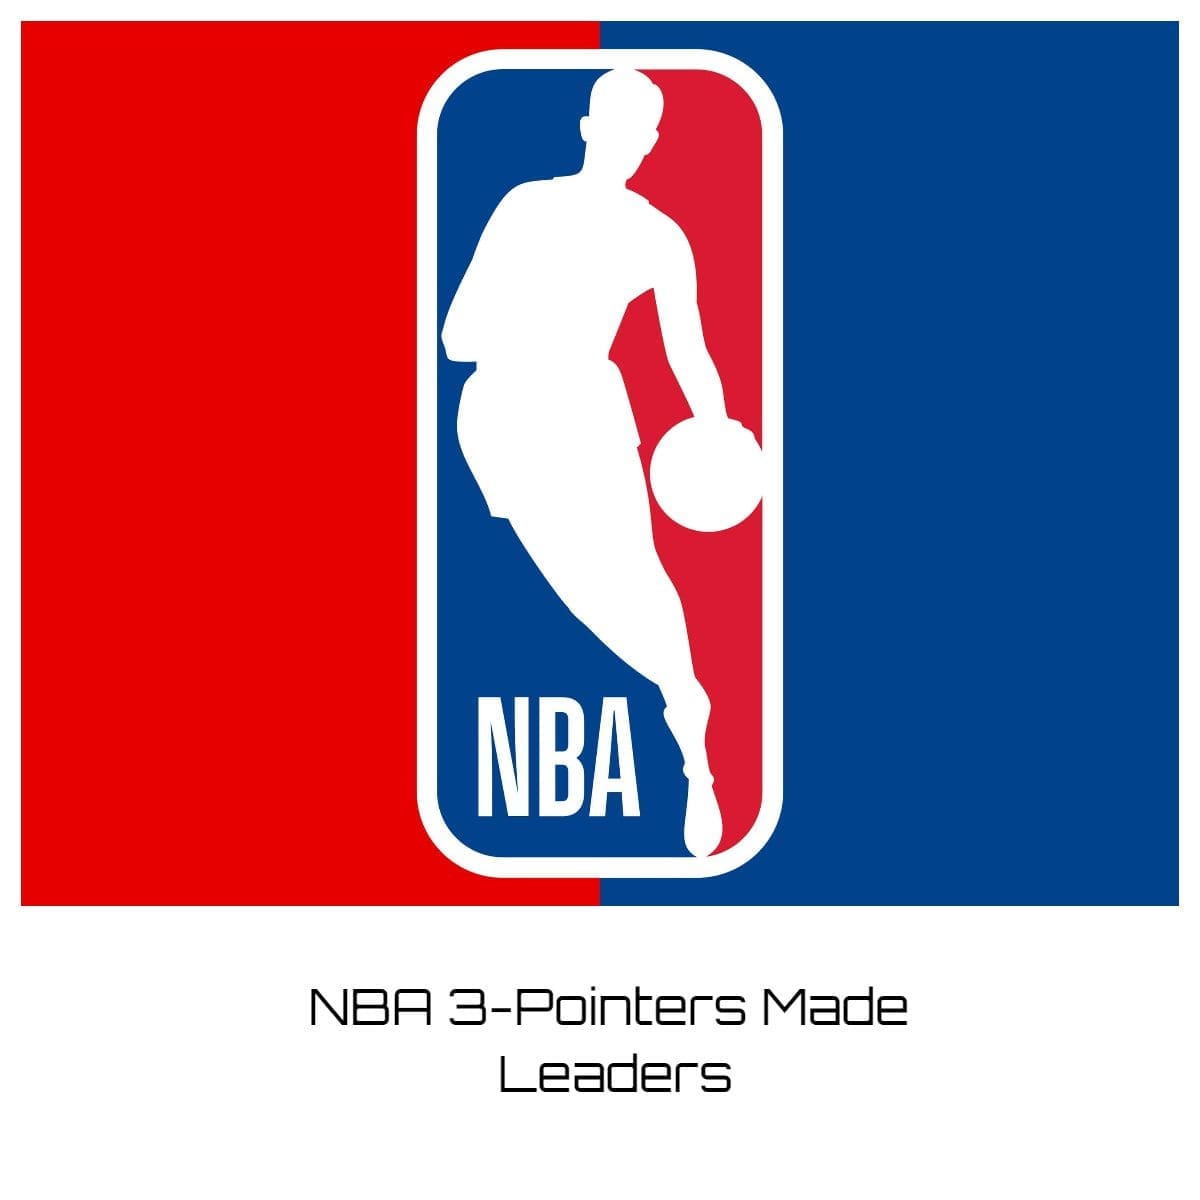 NBA 3-Pointers Made Leaders